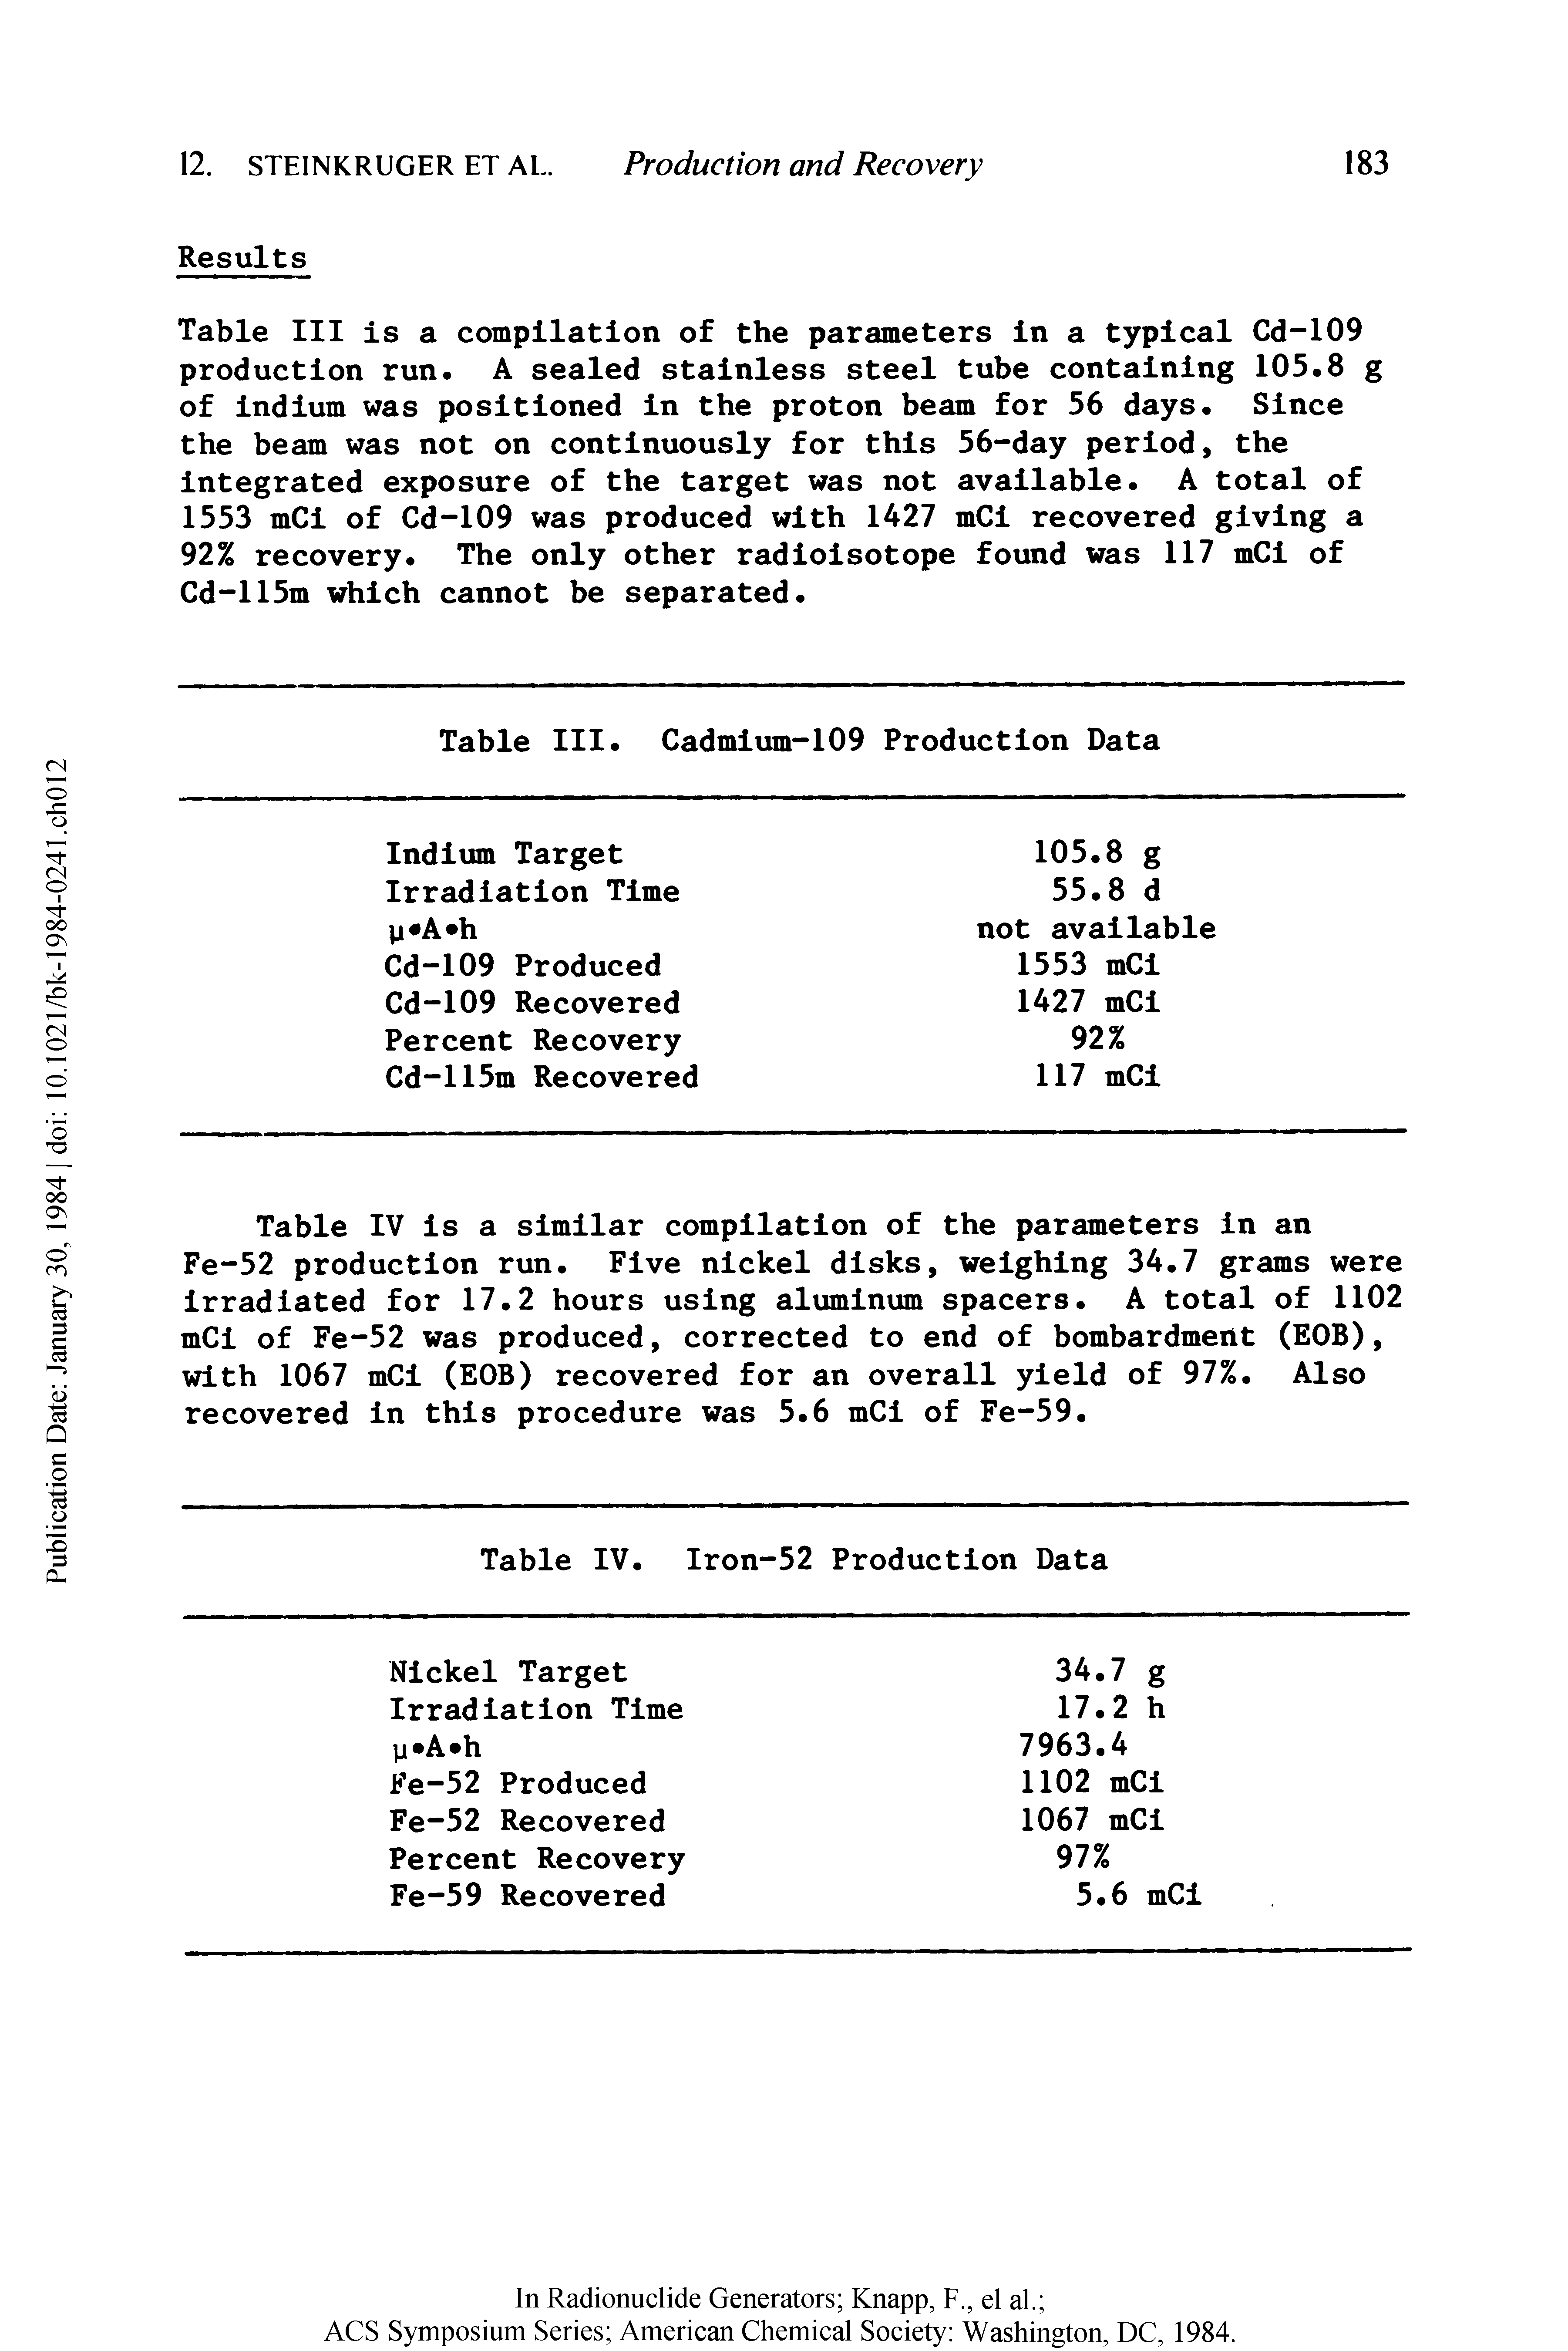 Table IV is a similar compilation of the parameters in an Fe-52 production run. Five nickel disks, weighing 34.7 grams were irradiated for 17.2 hours using aluminum spacers. A total of 1102 mCi of Fe-52 was produced, corrected to end of bombardment (EOB), with 1067 mCi (EOB) recovered for an overall yield of 97%. Also recovered in this procedure was 5.6 mCi of Fe-59.